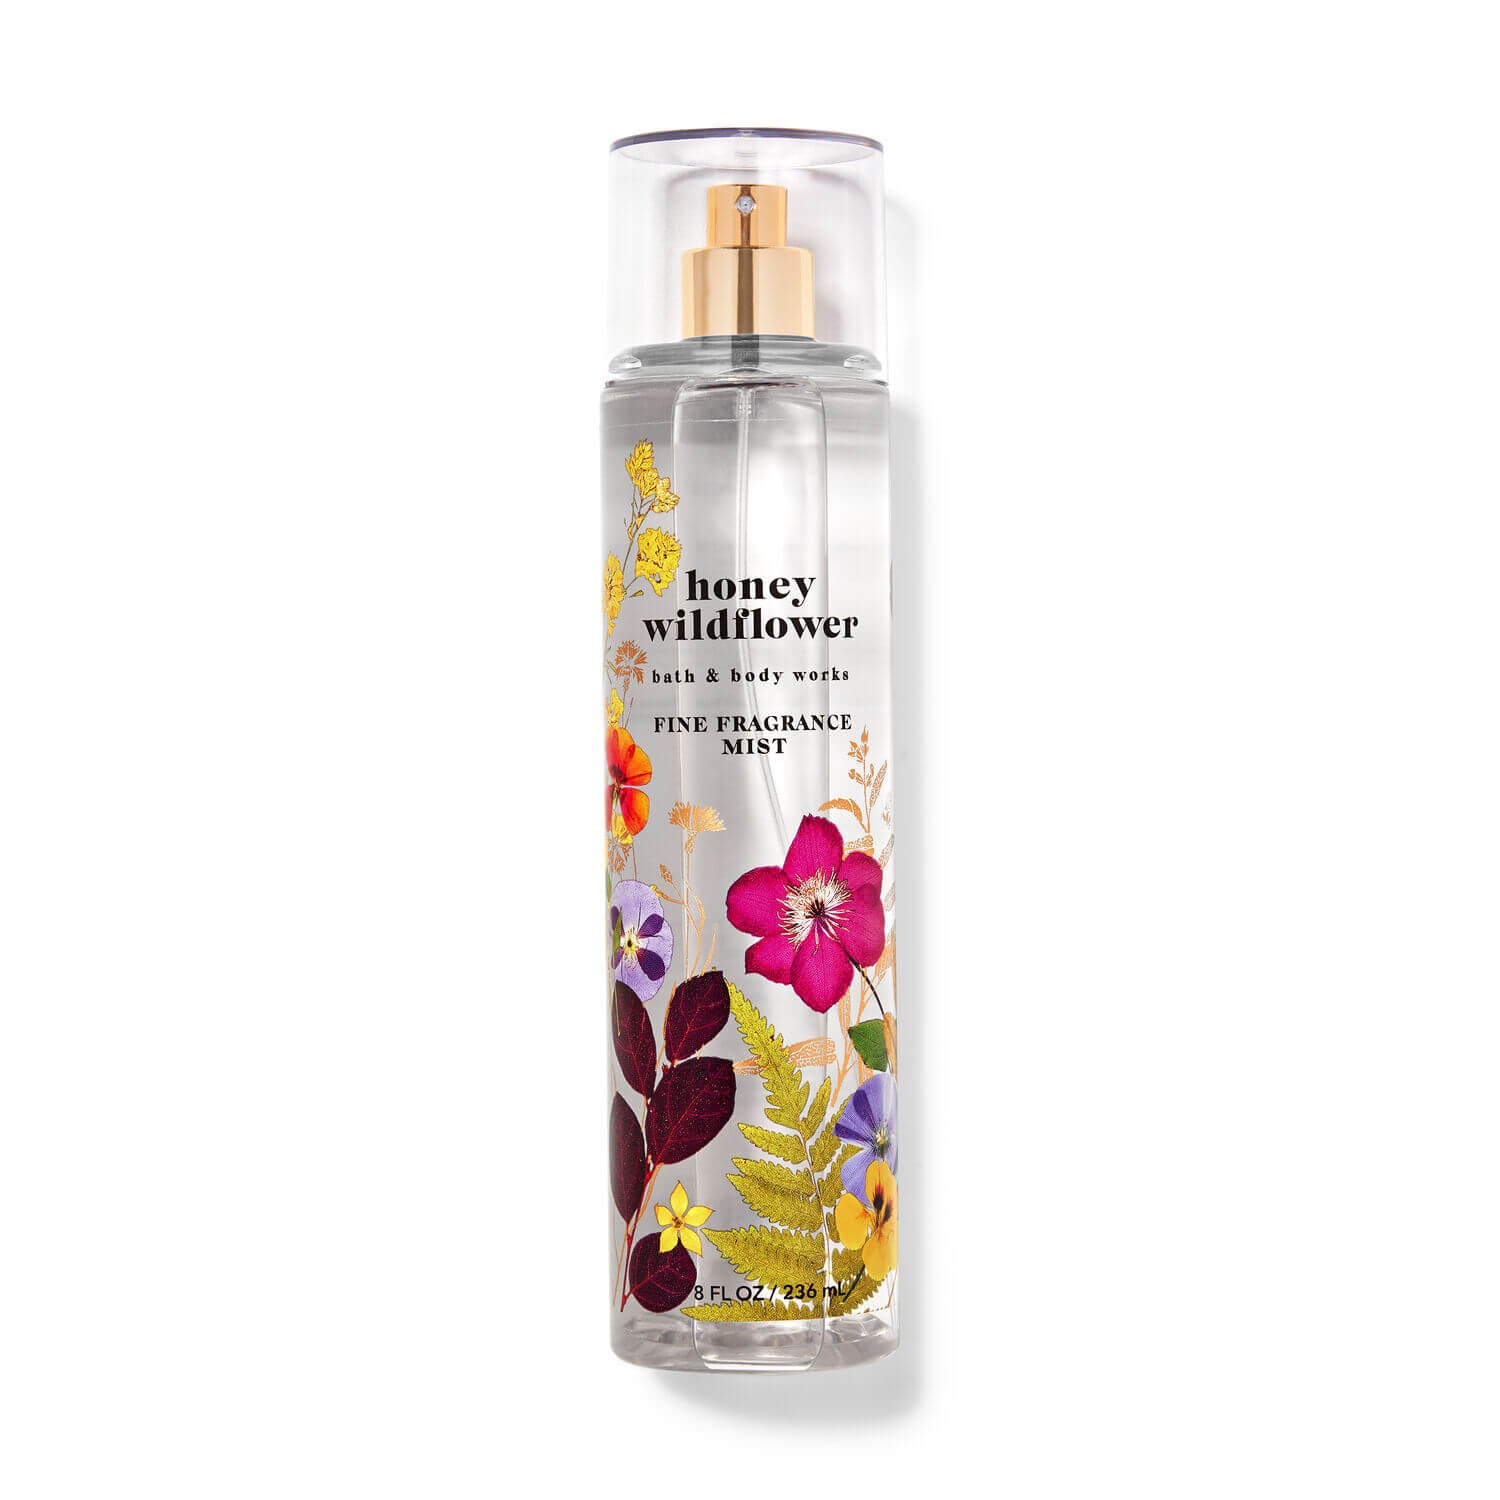 Shop 100% original Bath and Body Works mist in Honey Wildflower fragrance available at Heygirl.pk for delivery in Pakistan.